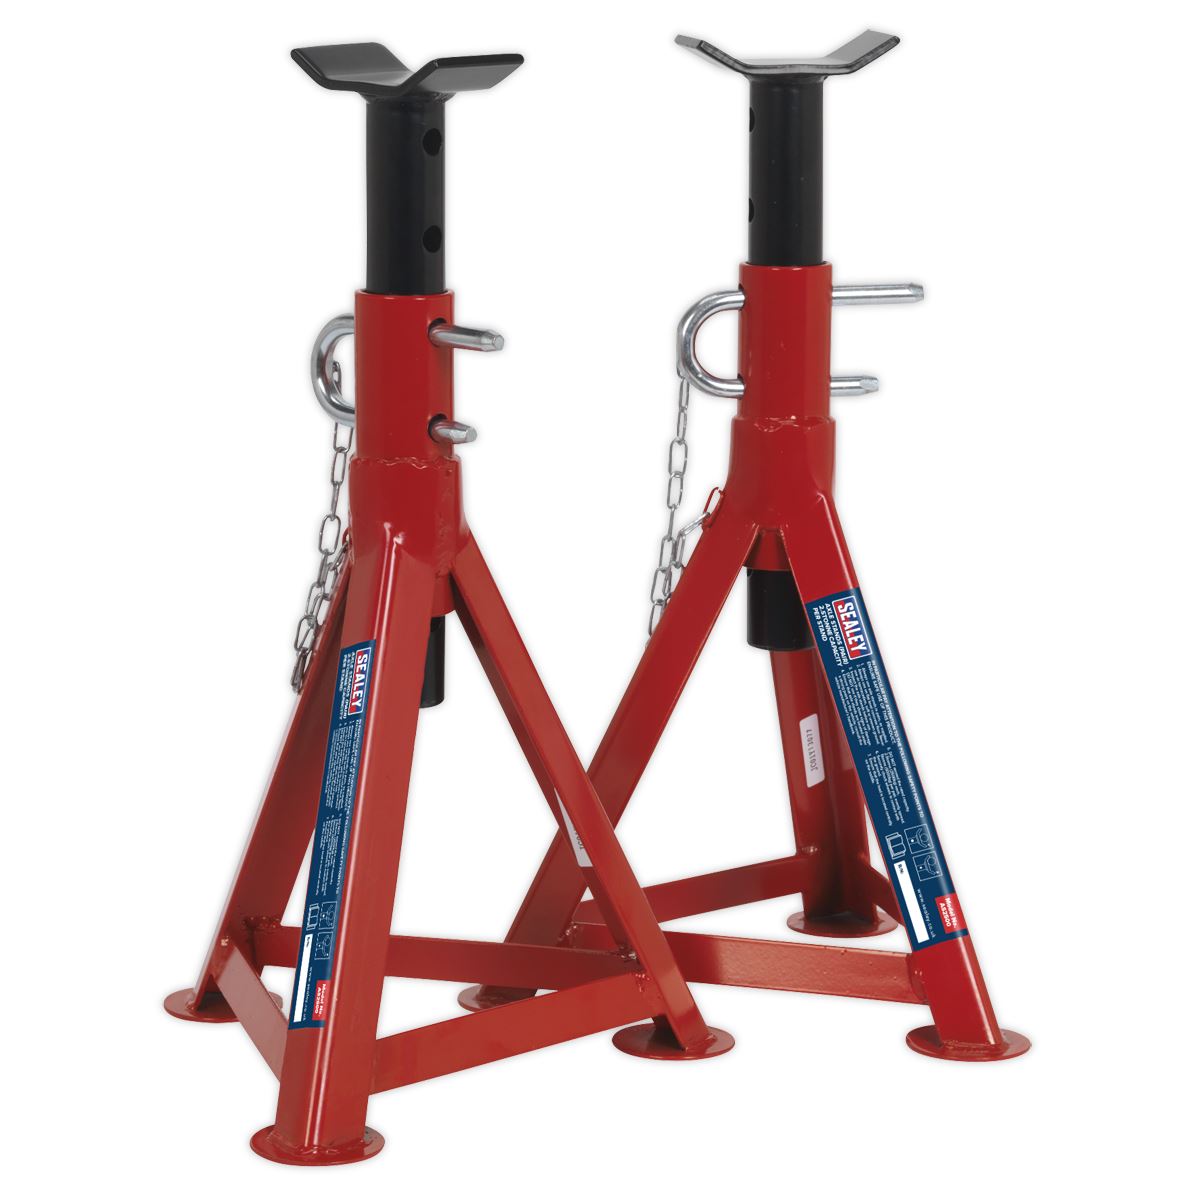 Sealey Axle Stands (Pair) 2.5 Tonne Capacity per Stand